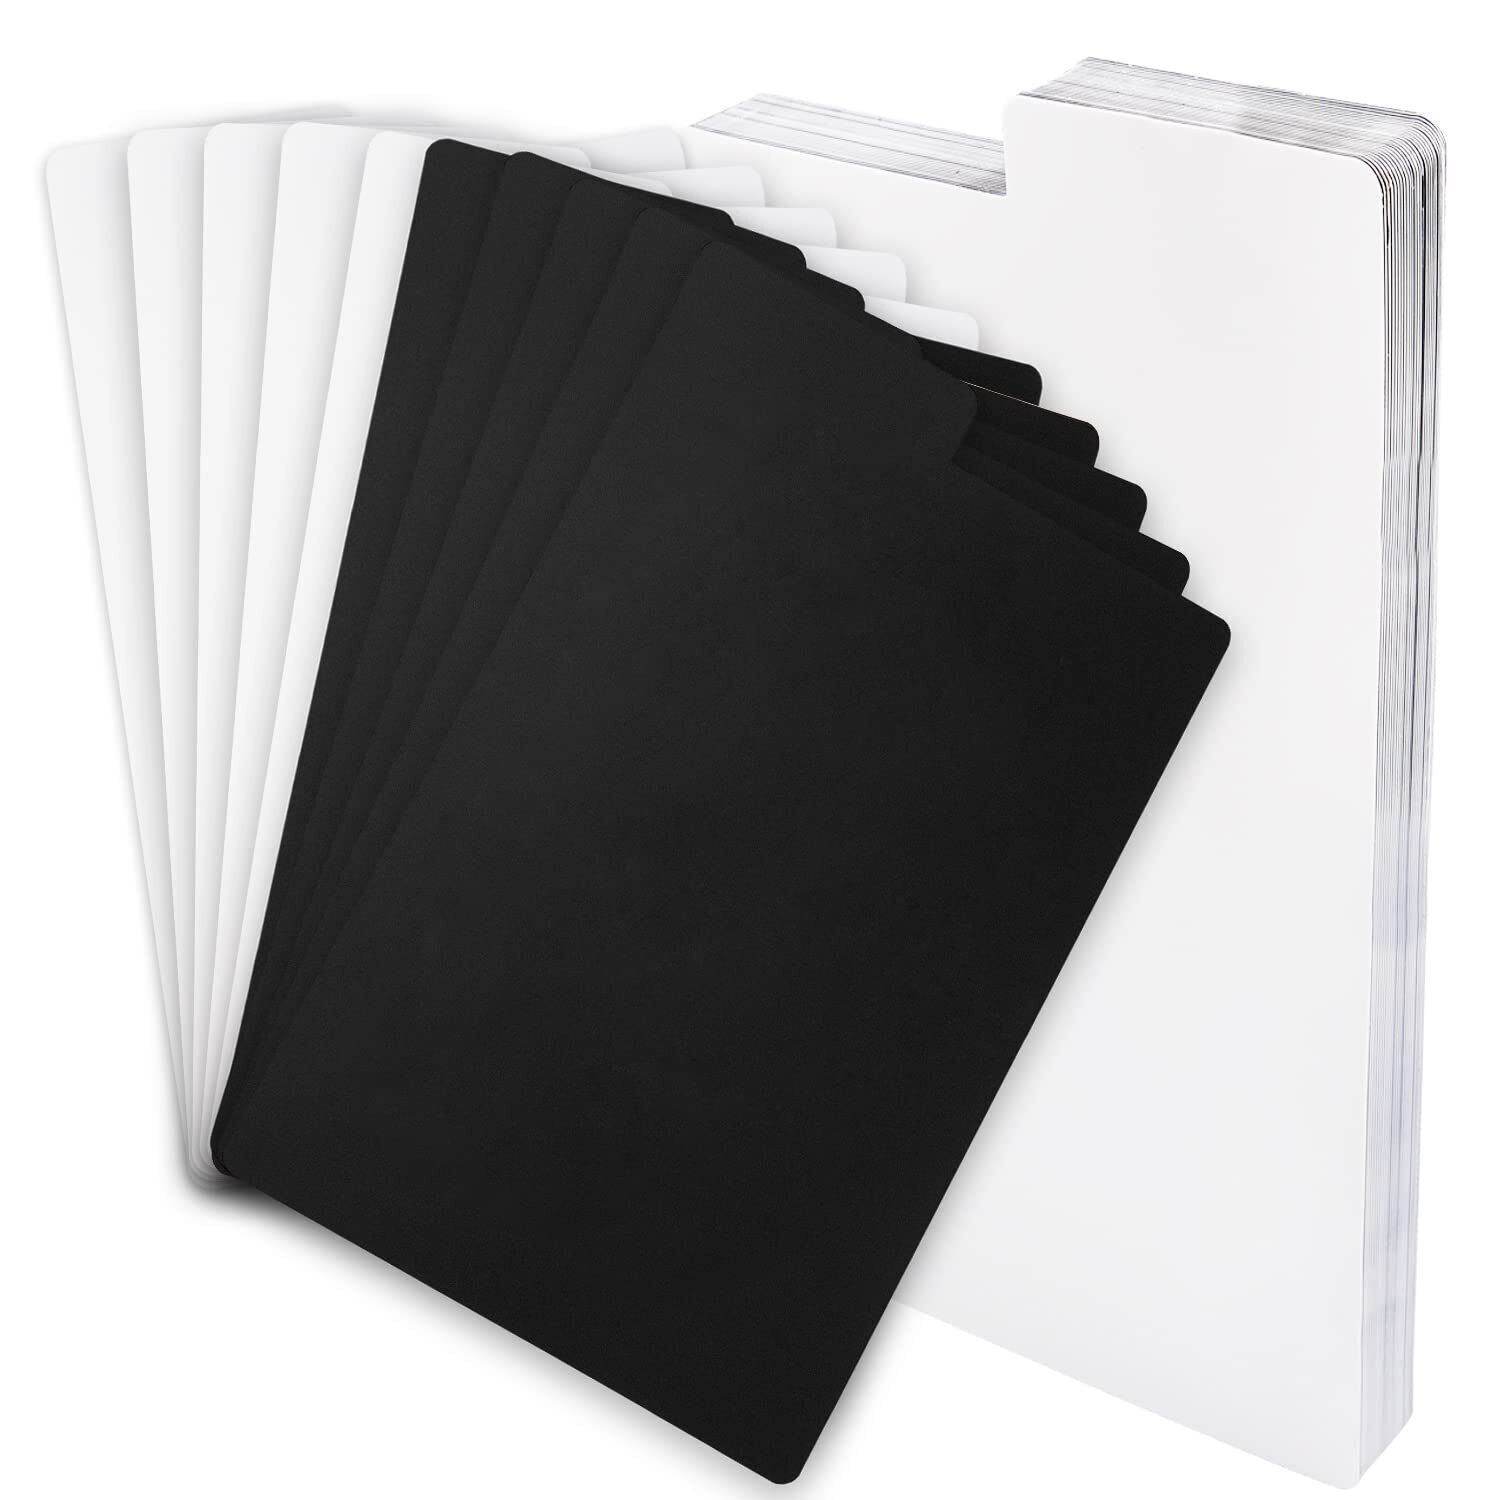 50Pcs Comic Book Dividers, TOUNALKER Large White Black Frosted Card Separator wi